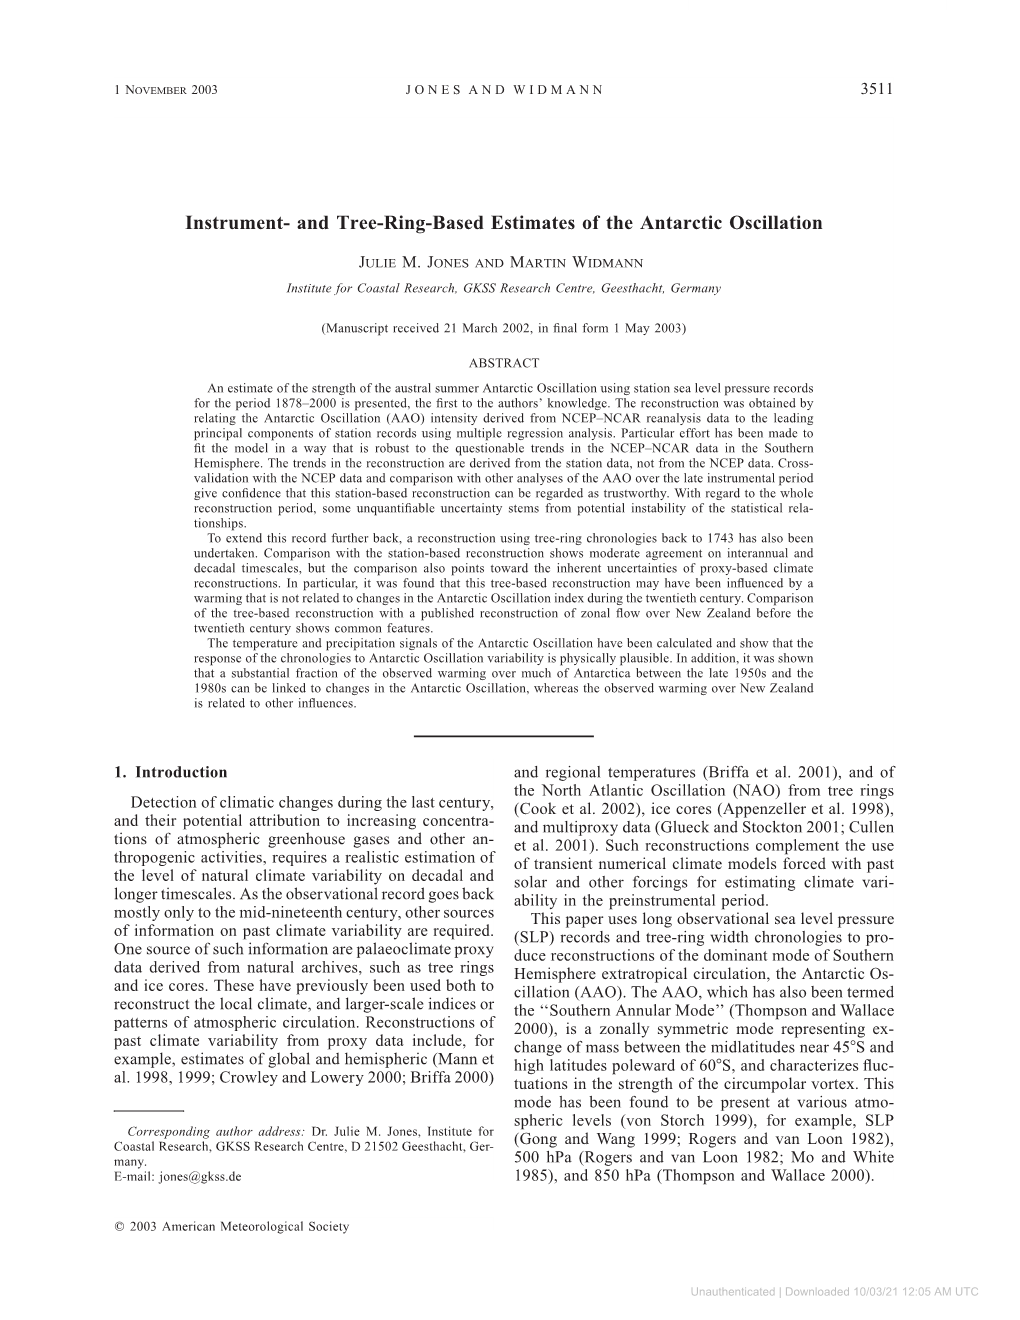 Instrument- and Tree-Ring-Based Estimates of the Antarctic Oscillation